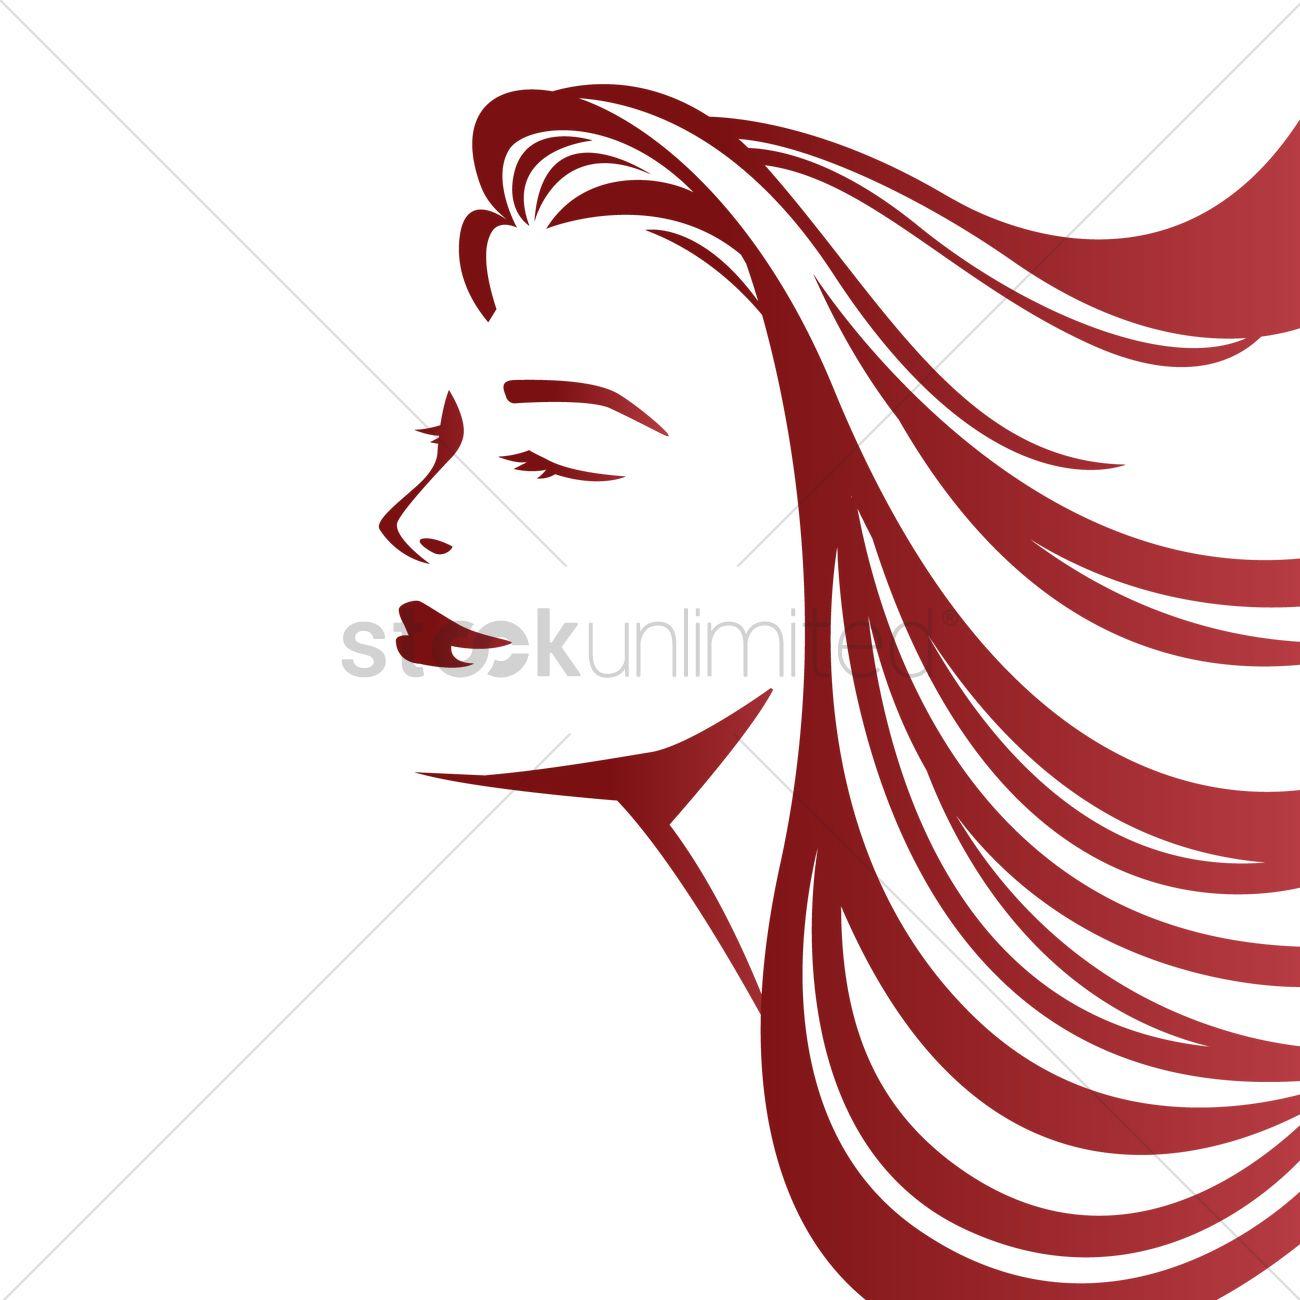 Lady with Flowing Hair Logo - Lady With Flowing Hair Logo | www.topsimages.com